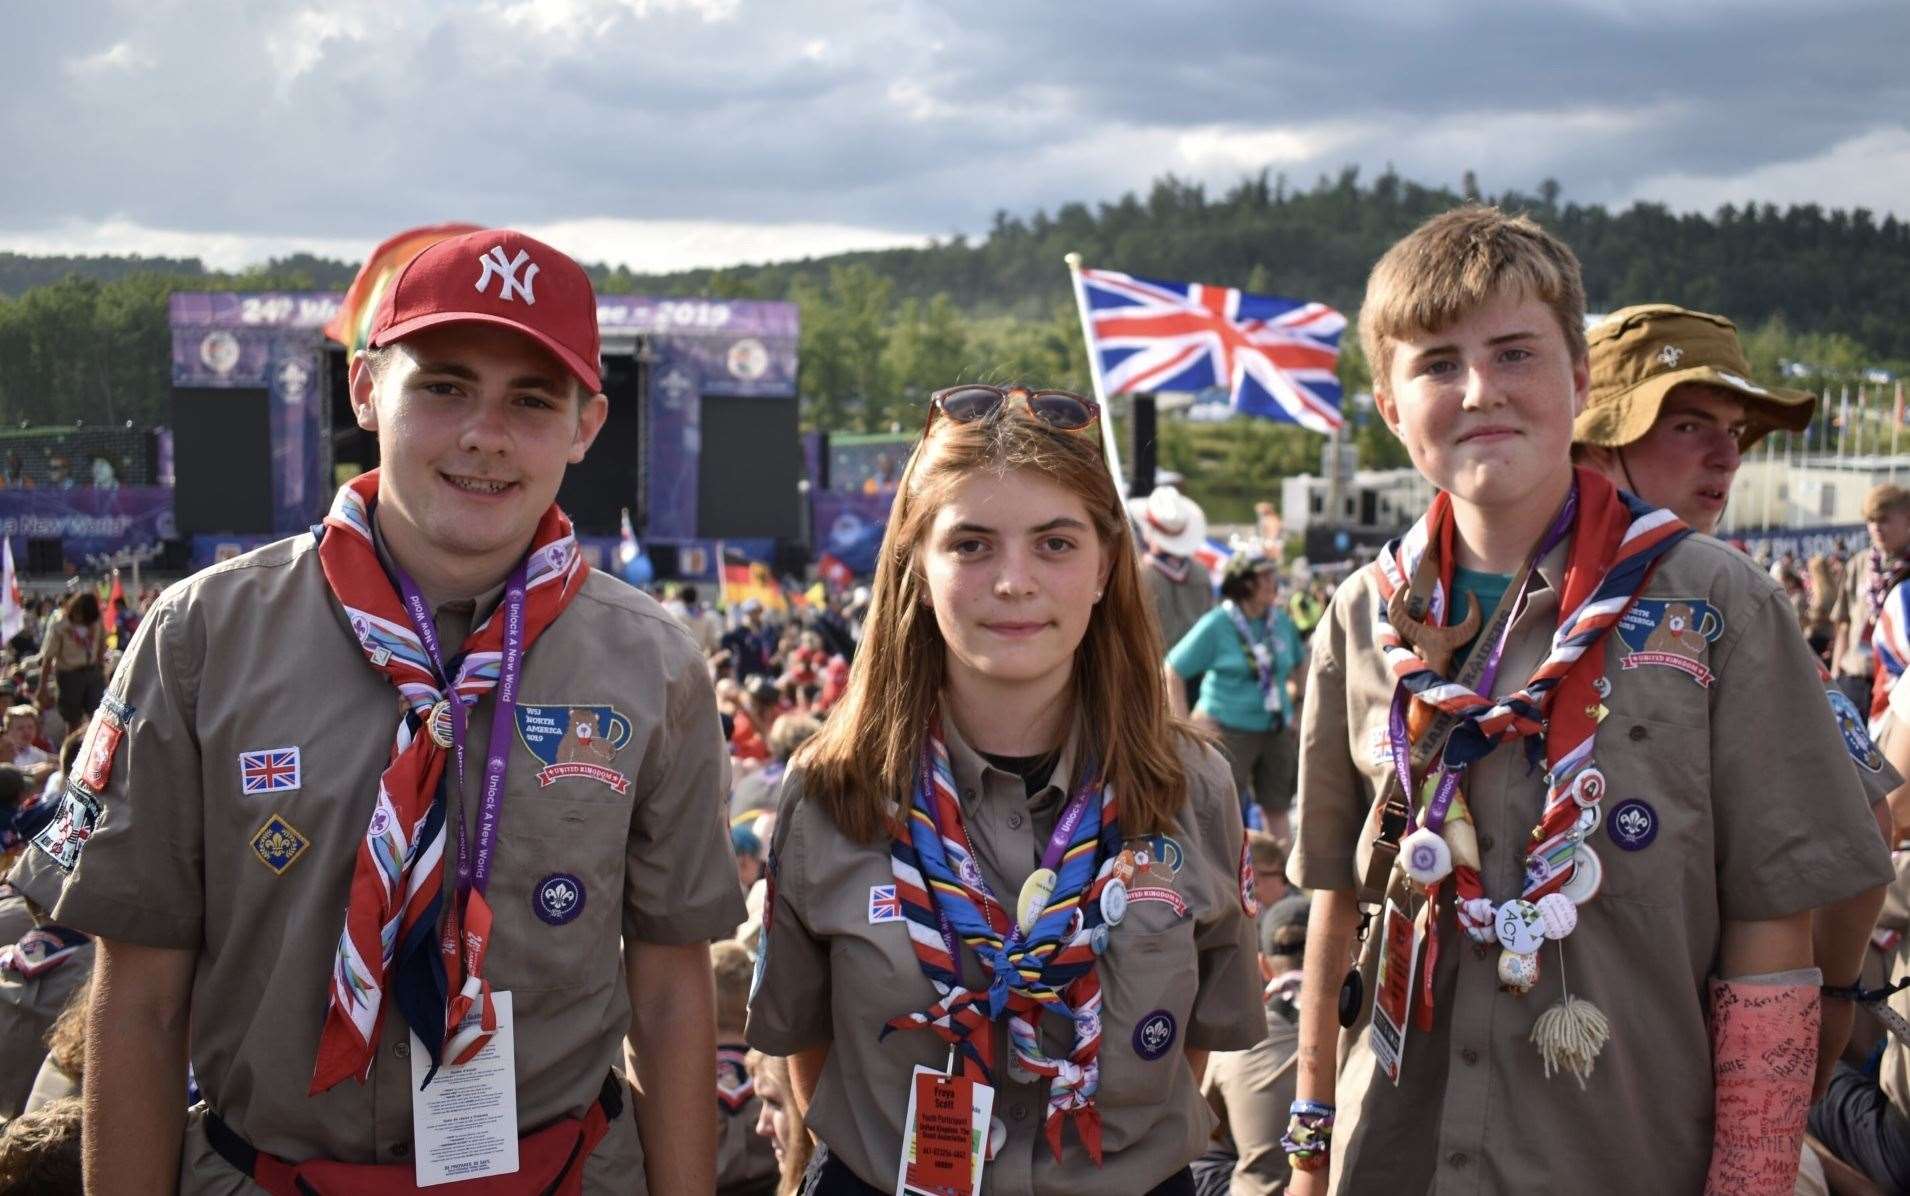 Daniel, Freya, and Toby at the jamboree in West Virginia (15208991)